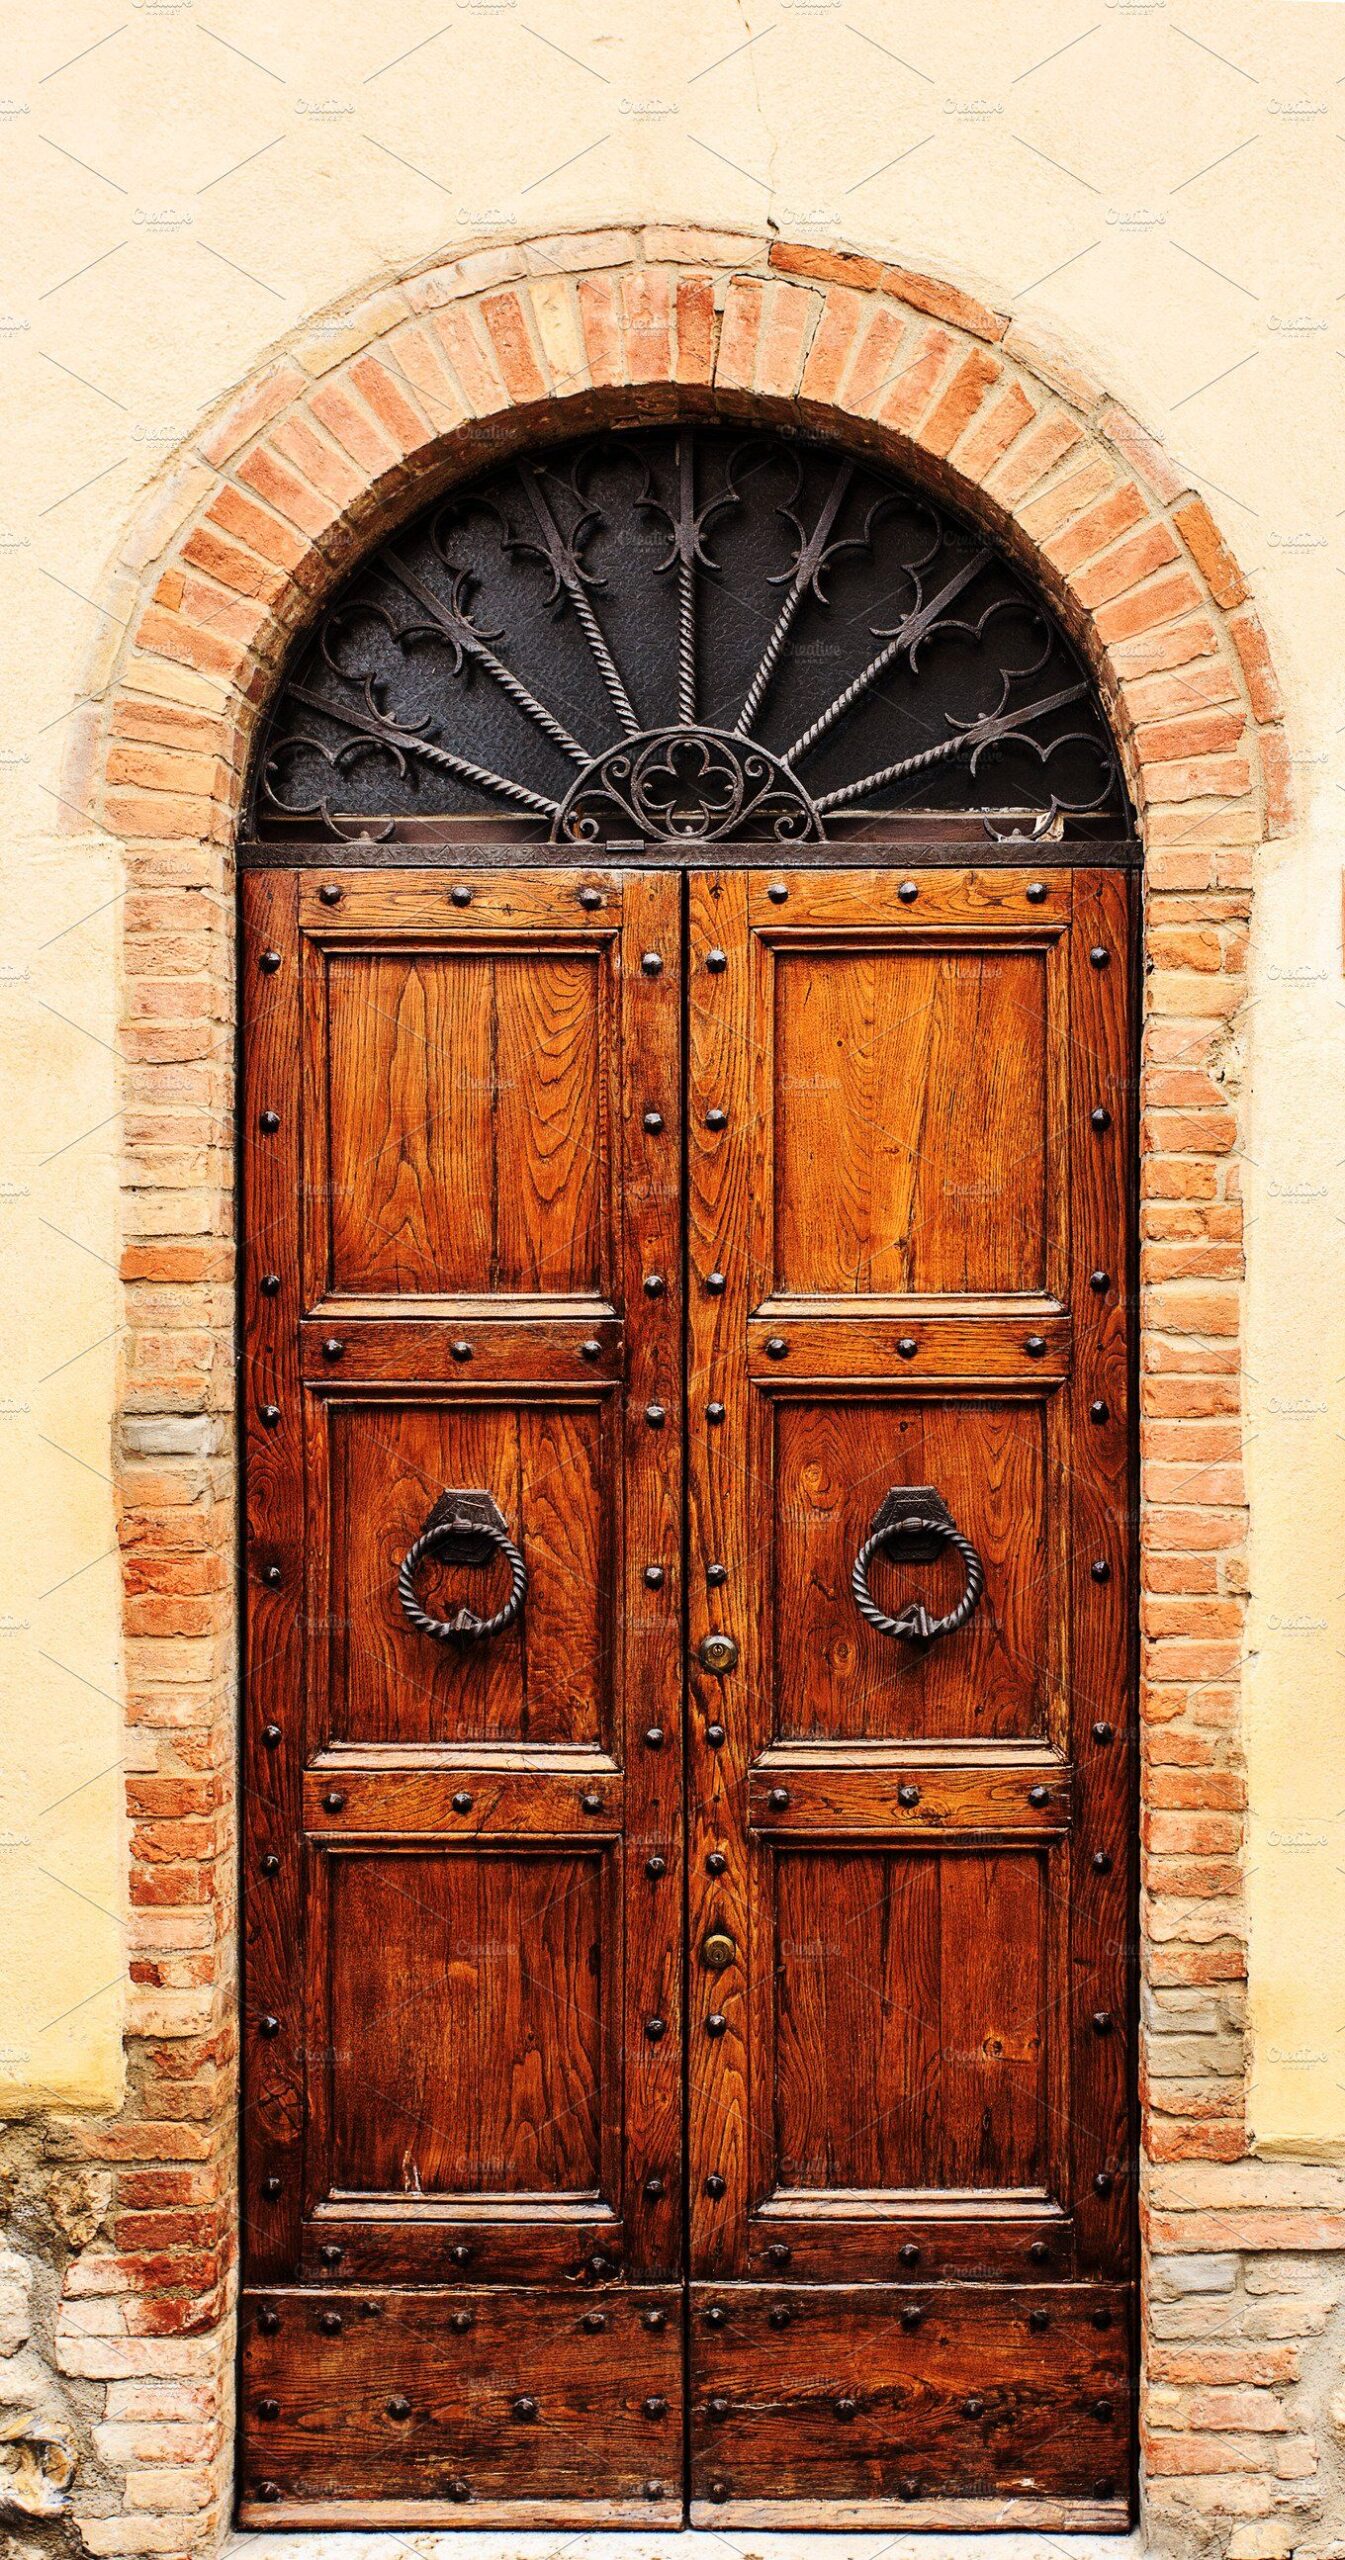 Wooden Door Designs: Classic and Sturdy Entrances to Your Home